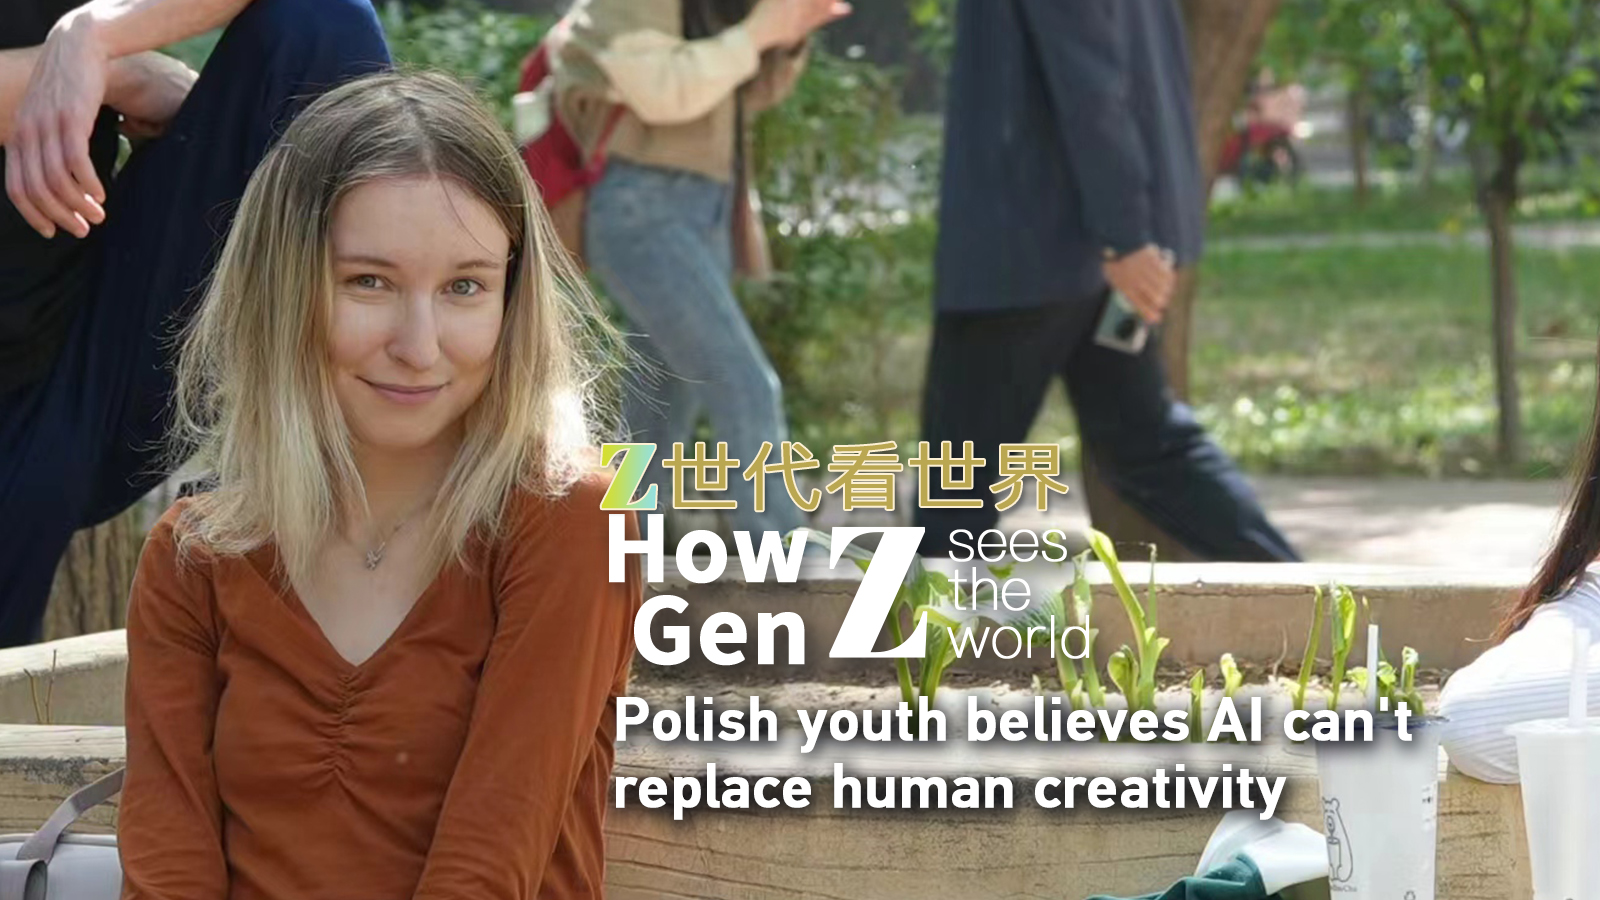 Polish youth believes AI can't replace human creativity